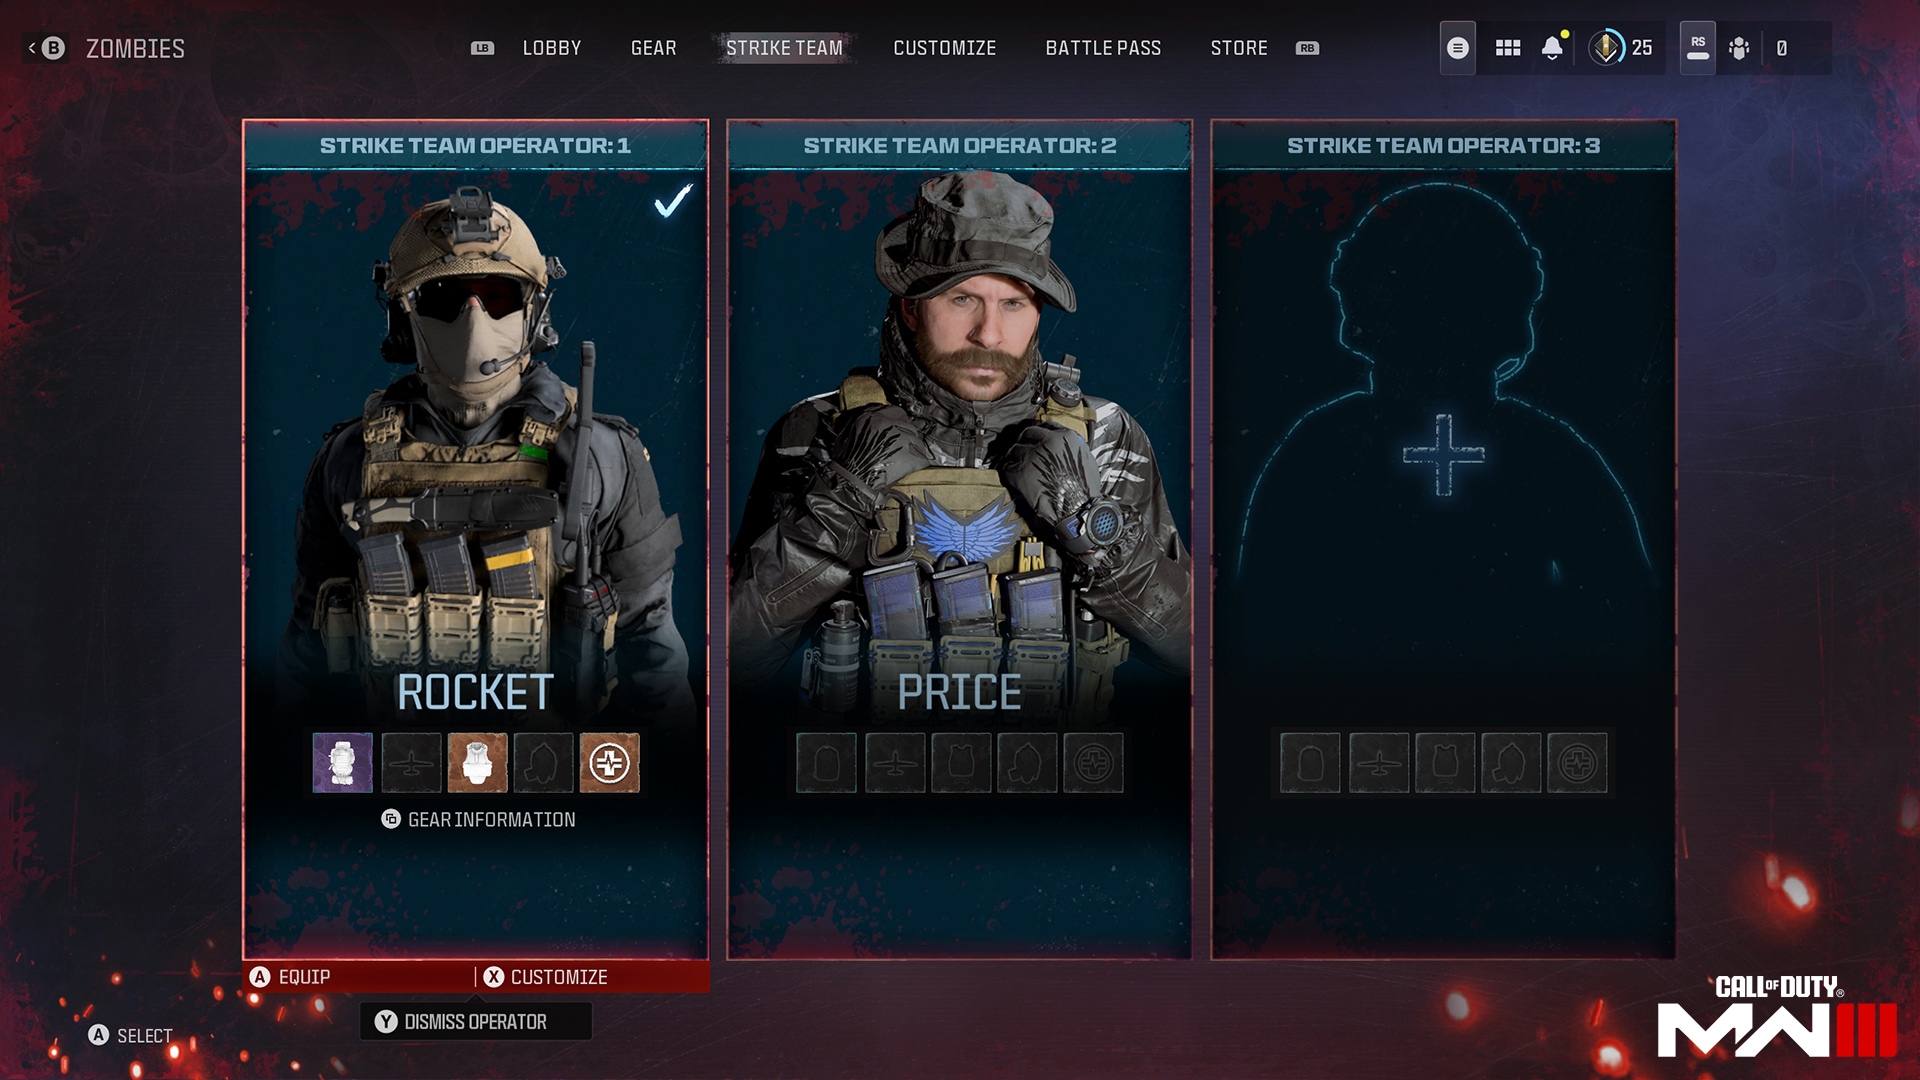 Splitscreen multi-player ADS is blocked by kill tags making it impossible  to see anything. : r/ModernWarfareII